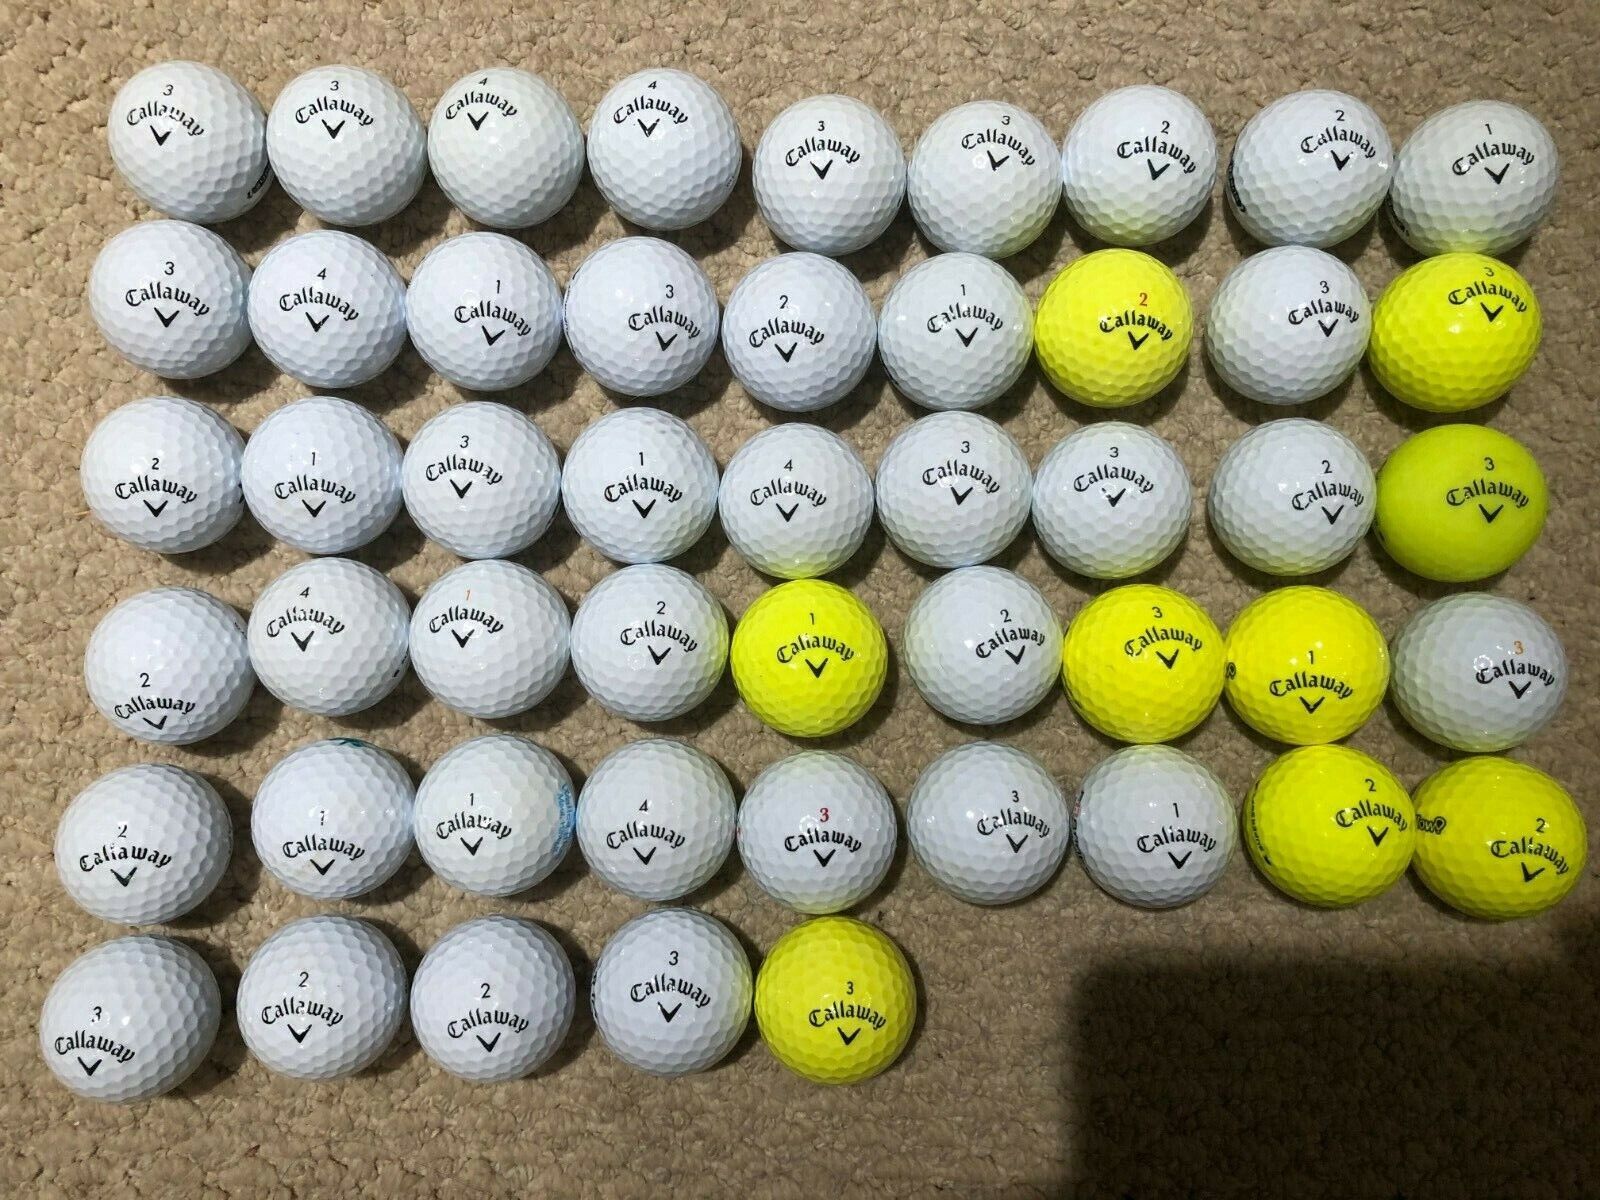 50 used golf balls Callaway Supersot and others Great condition AAAA